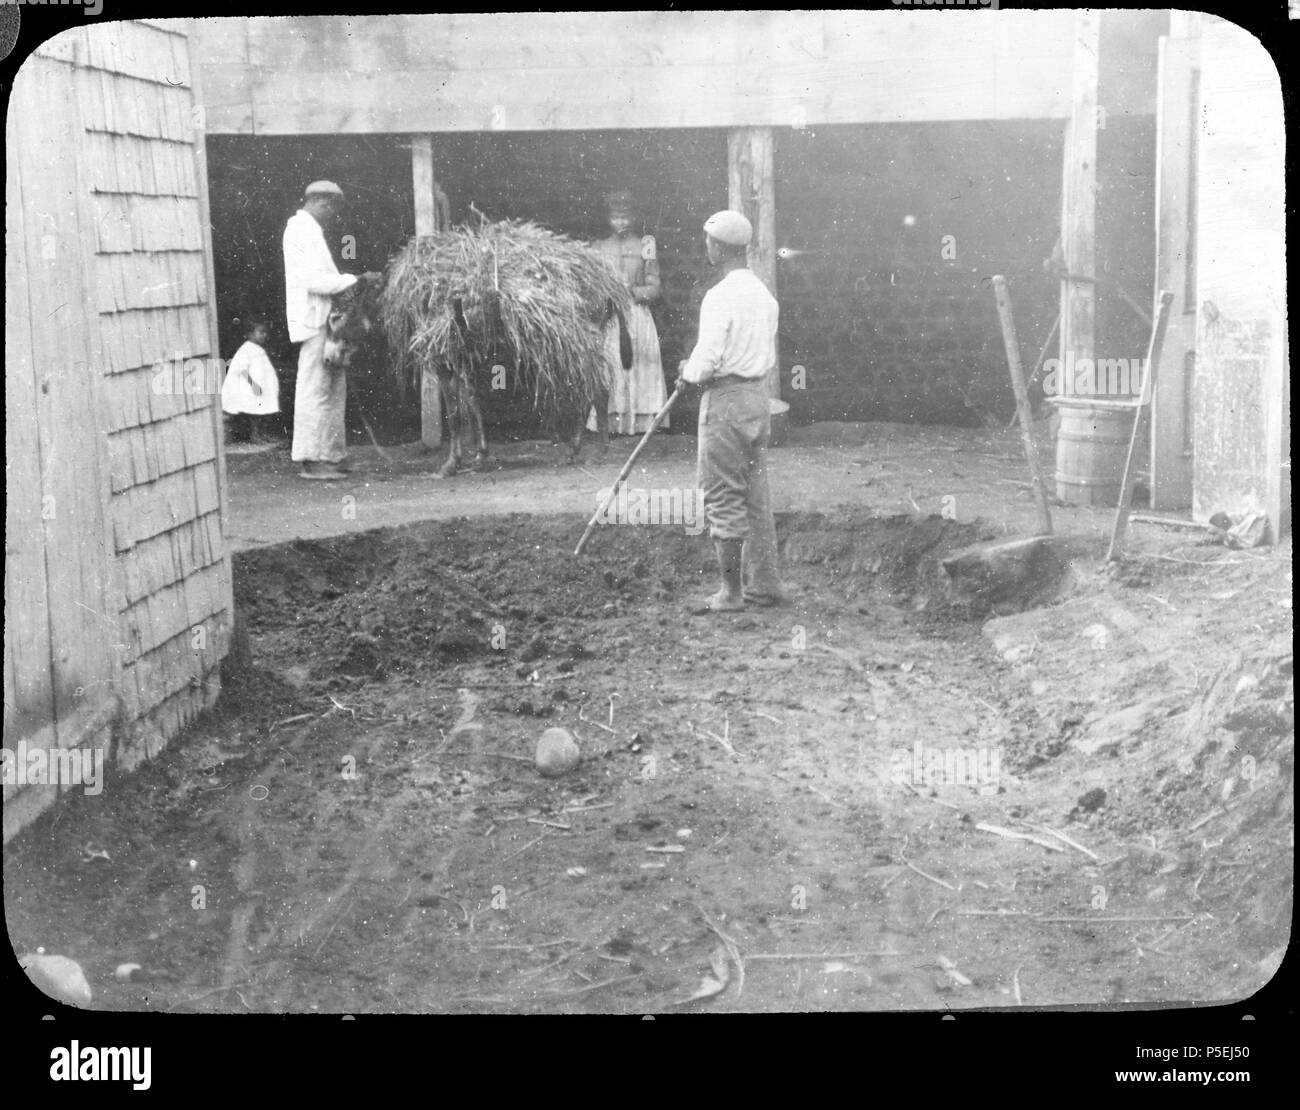 Cleansing Hotel yard. Georgetown.. A man shovelling volcanic ash which has accumulated to a depth of 40-50cm in a hotel yard. Another man, woman and child can also be seen.. 1902. N/A 352 Cleansing Hotel yard, Georgetown YORYM-TA0101 Stock Photo